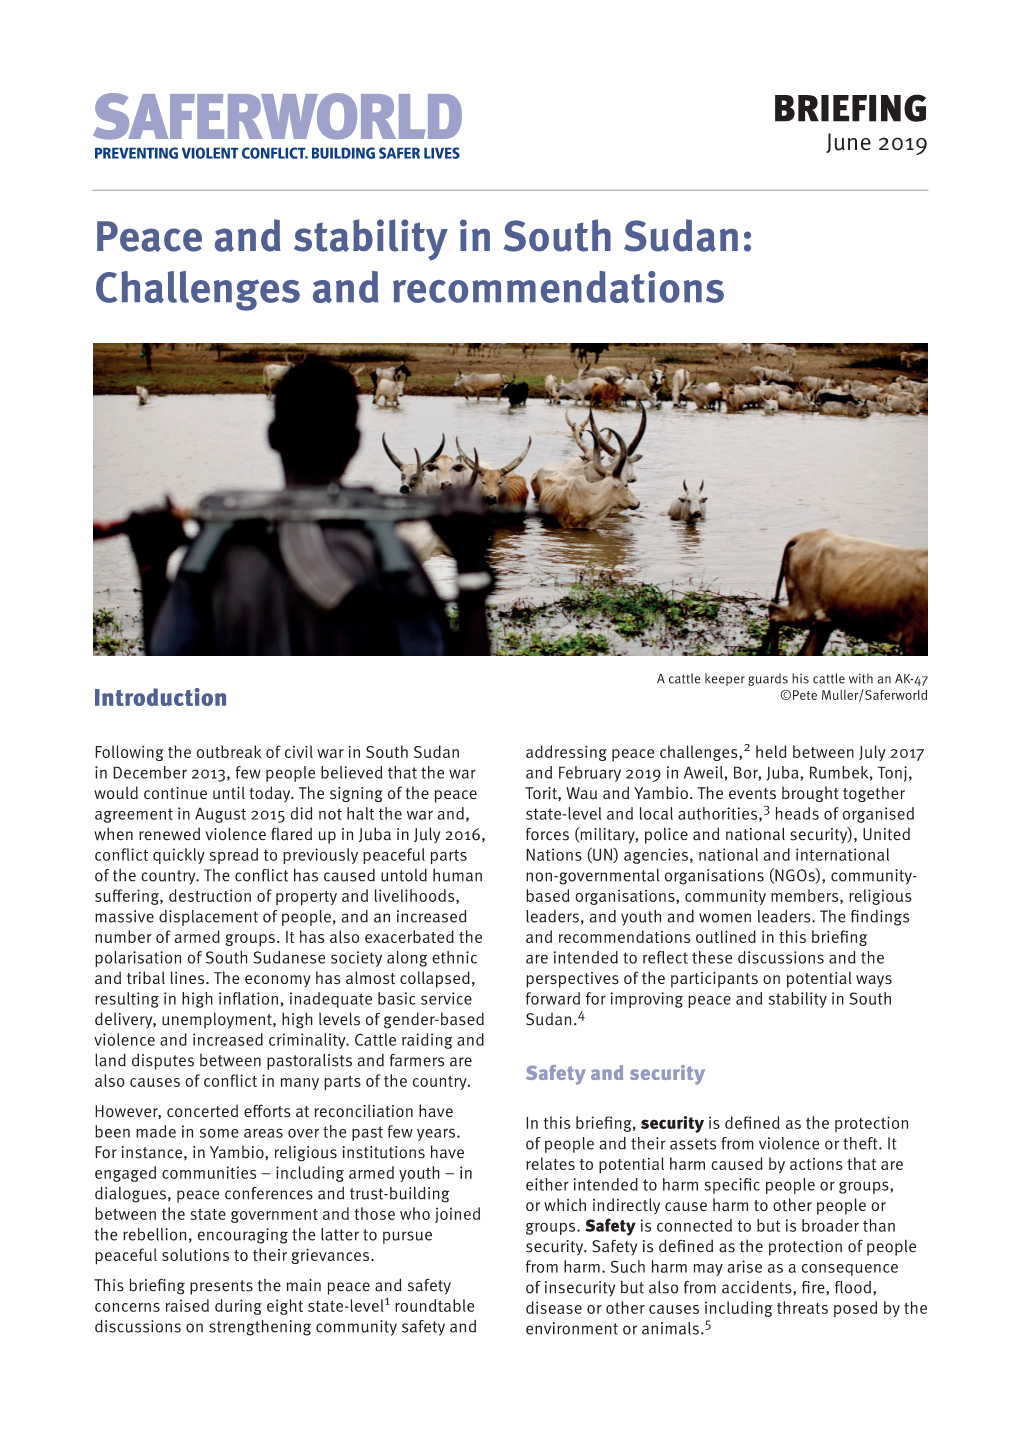 Peace and Stability in South Sudan: Challenges and Recommendations